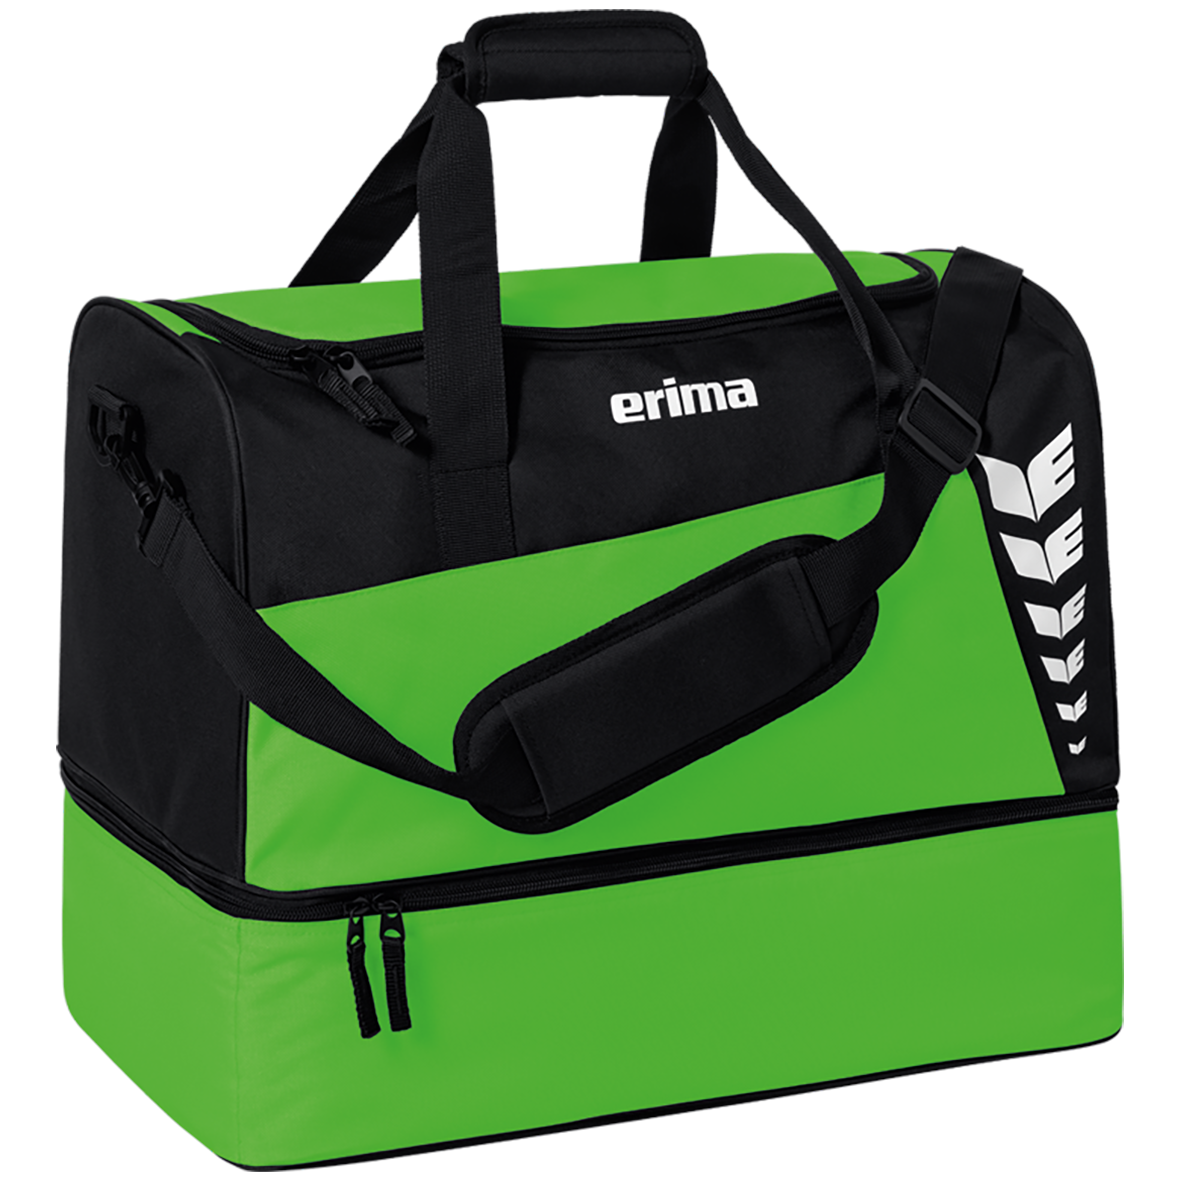 ERIMA SIX WINGS SPORTS BAG WITH BOTTOM COMPARTMENT, GREEN-BLACK.